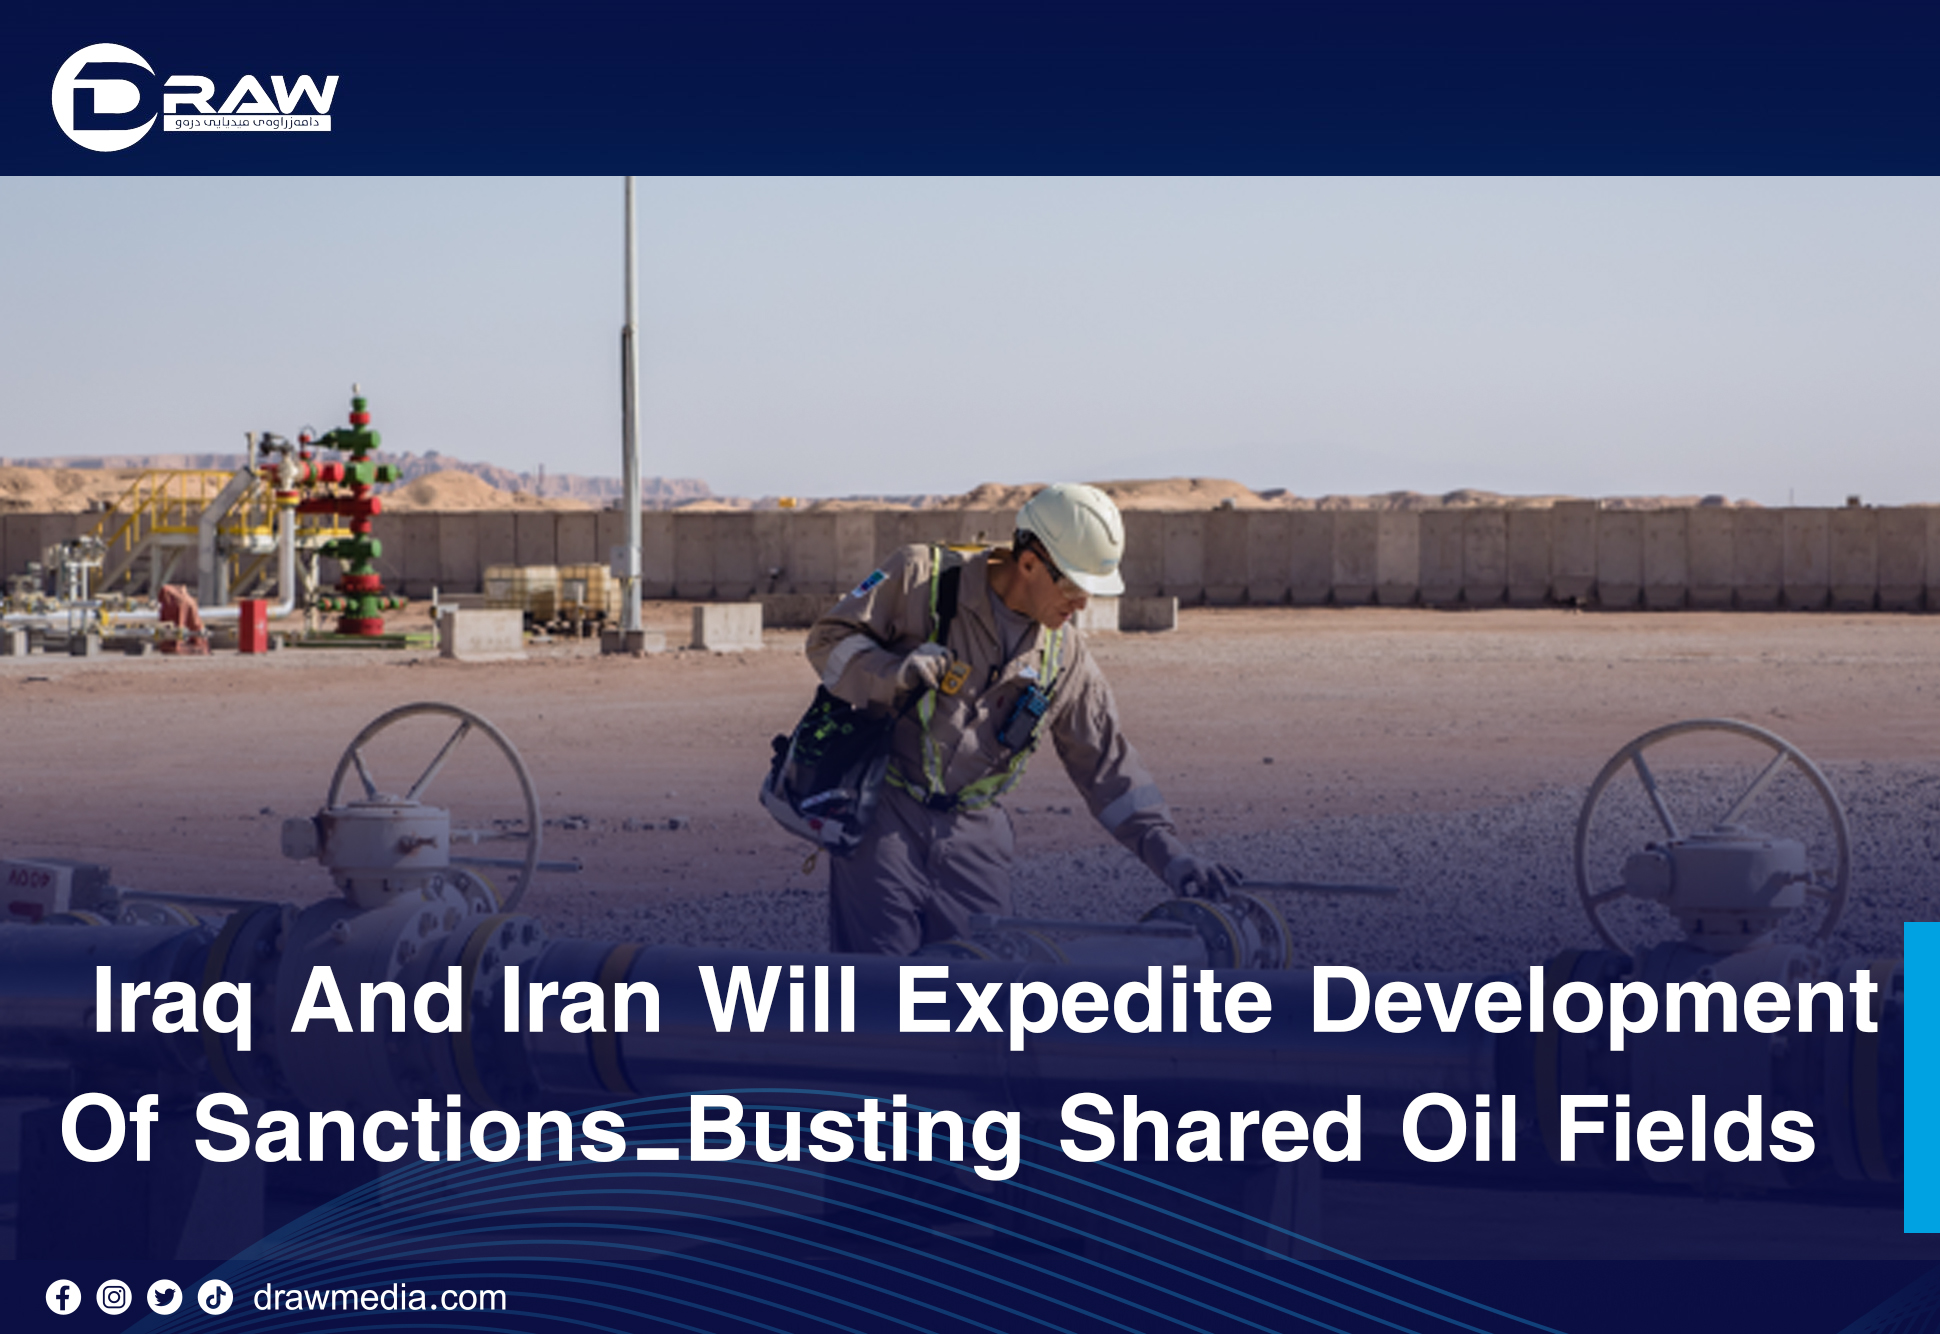 Draw Media- Iraq And Iran Will Expedite Development Of Sanctions-Busting Shared Oil Fields